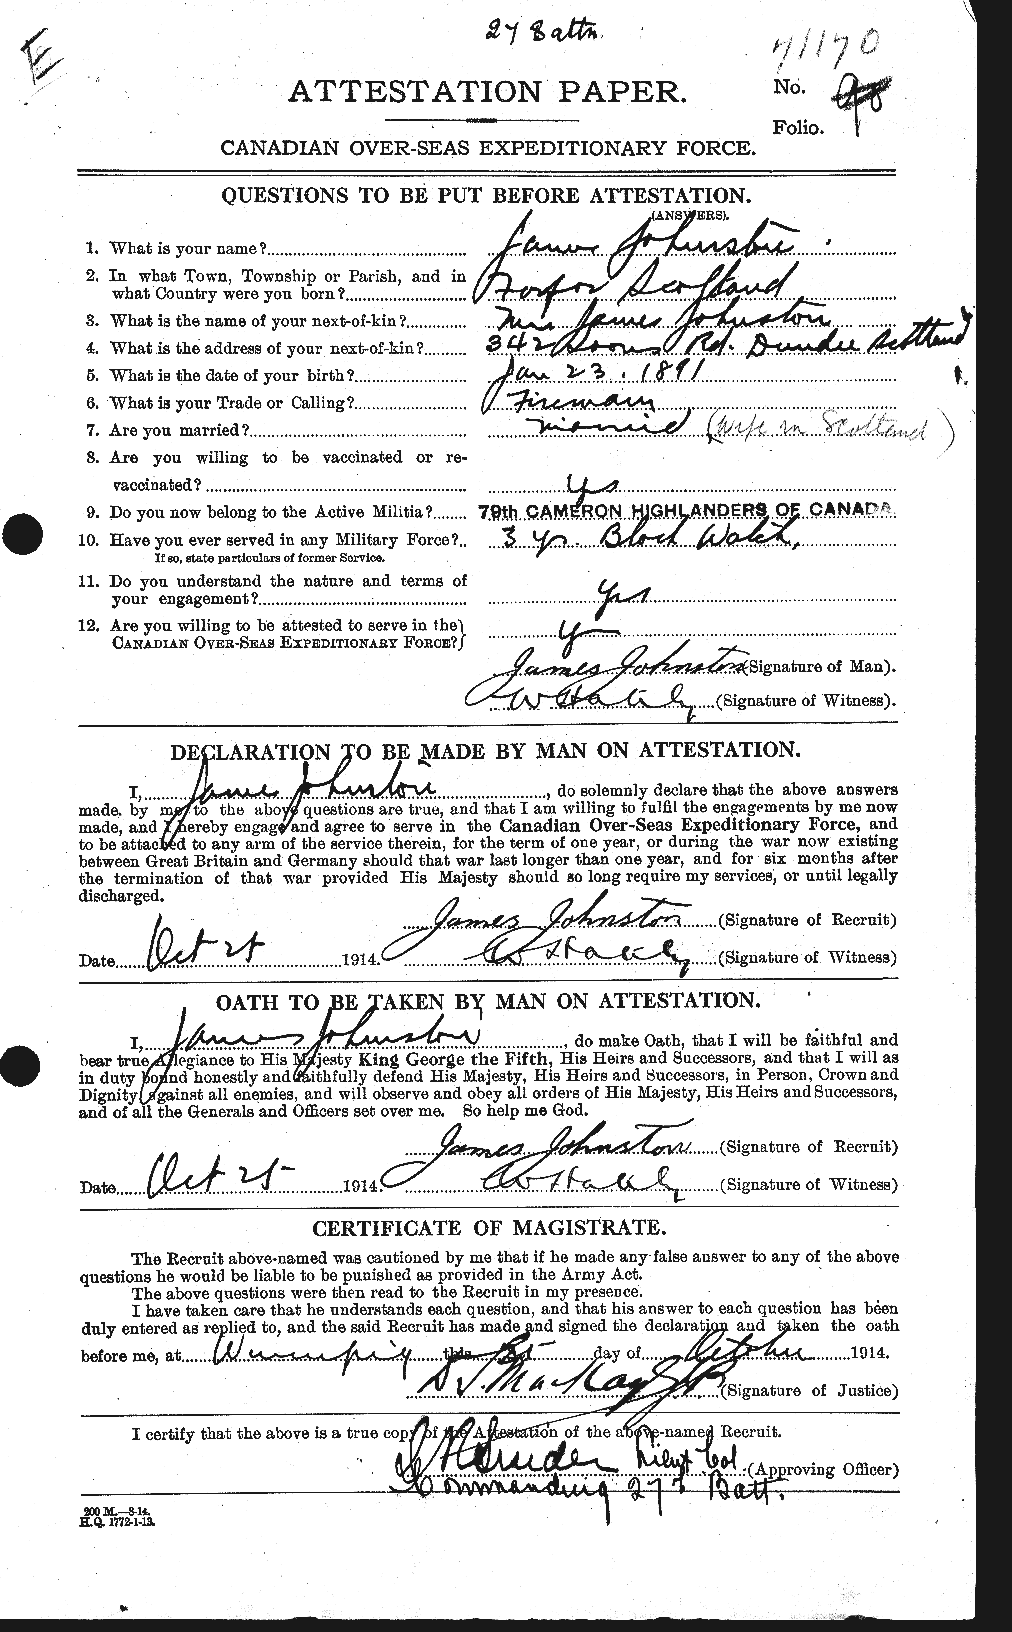 Personnel Records of the First World War - CEF 422712a